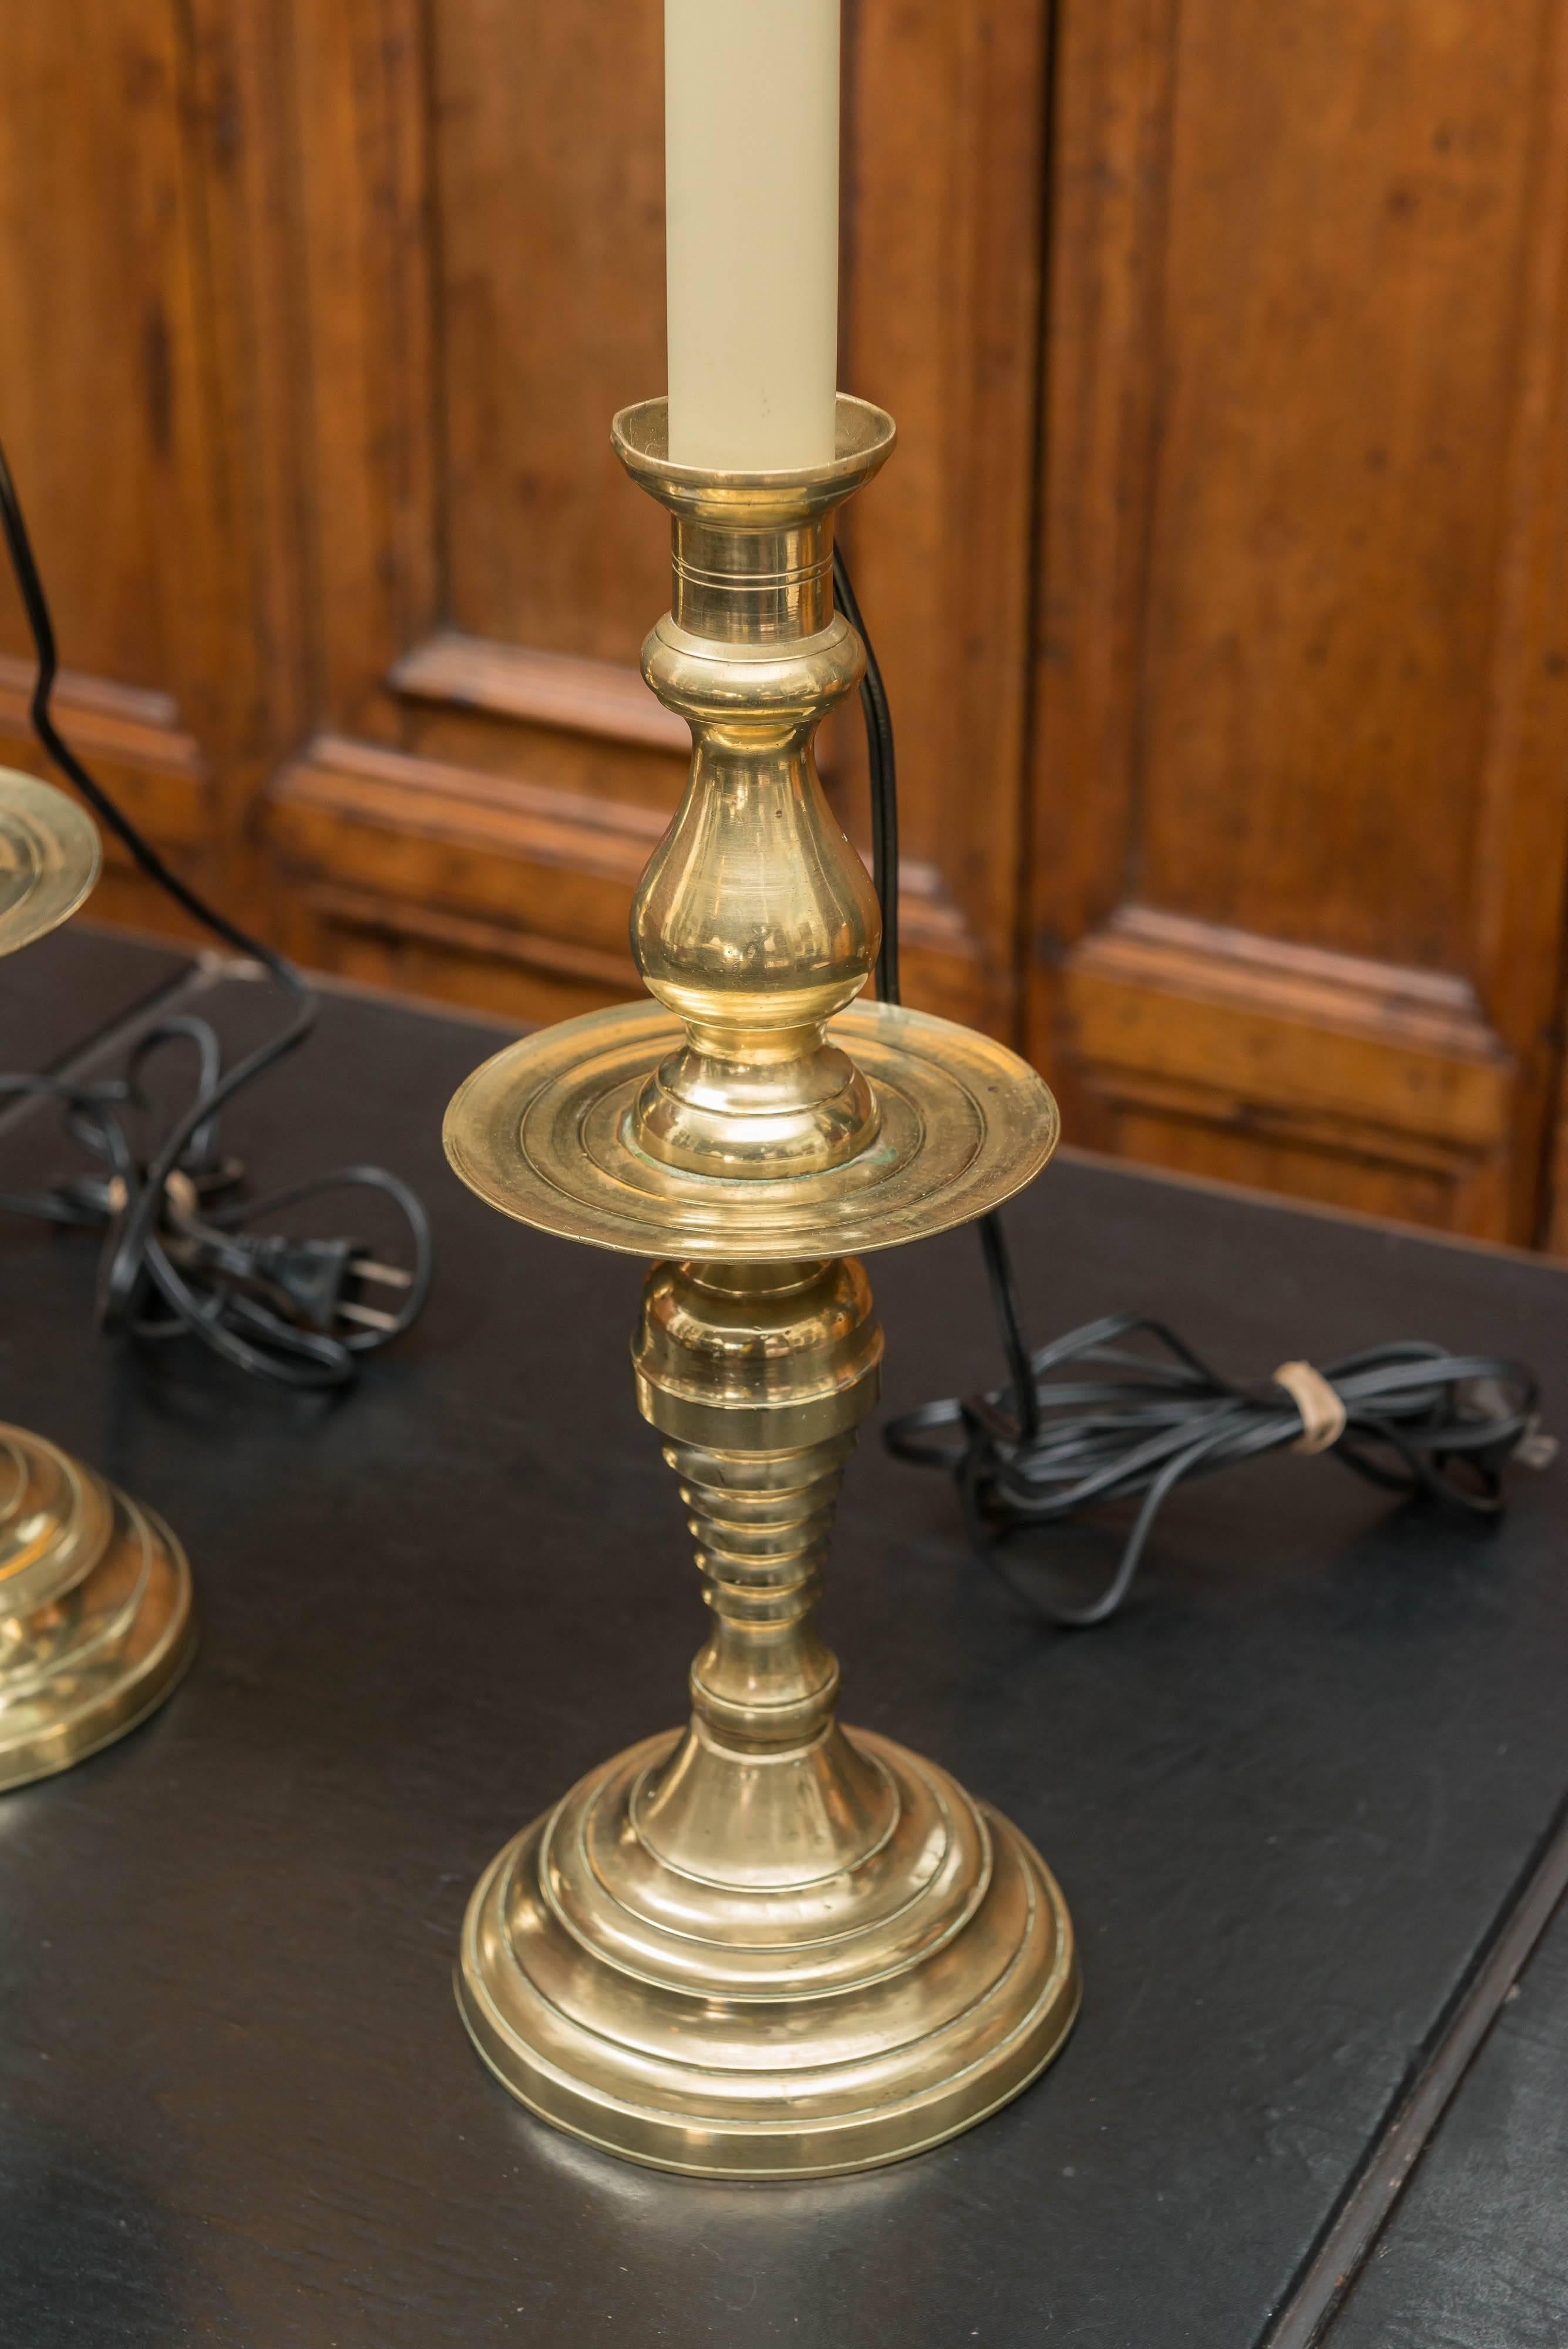 Pair Of Late 19th Century Large Scale English Brass Candlestick Lamps. Good old brass color with a high hand polished surface. New  three way sockets and wiring. Fitted with removable harps to accommodate shade size. Candlesticks are 14.5 inches